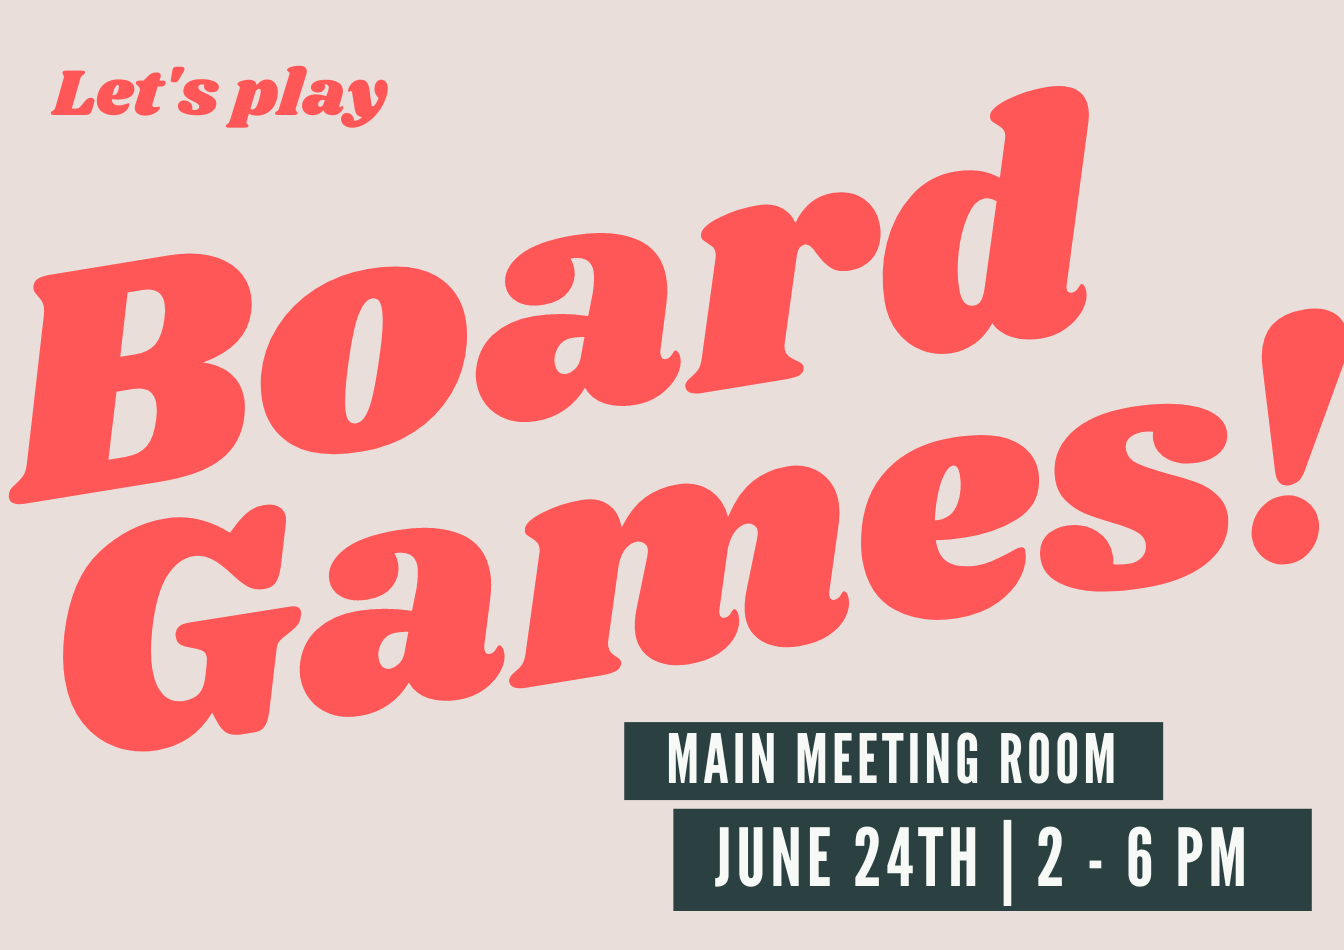 Text reading: "Let's play board games! ; Main Meeting Room ; June 24th, 2-5pm